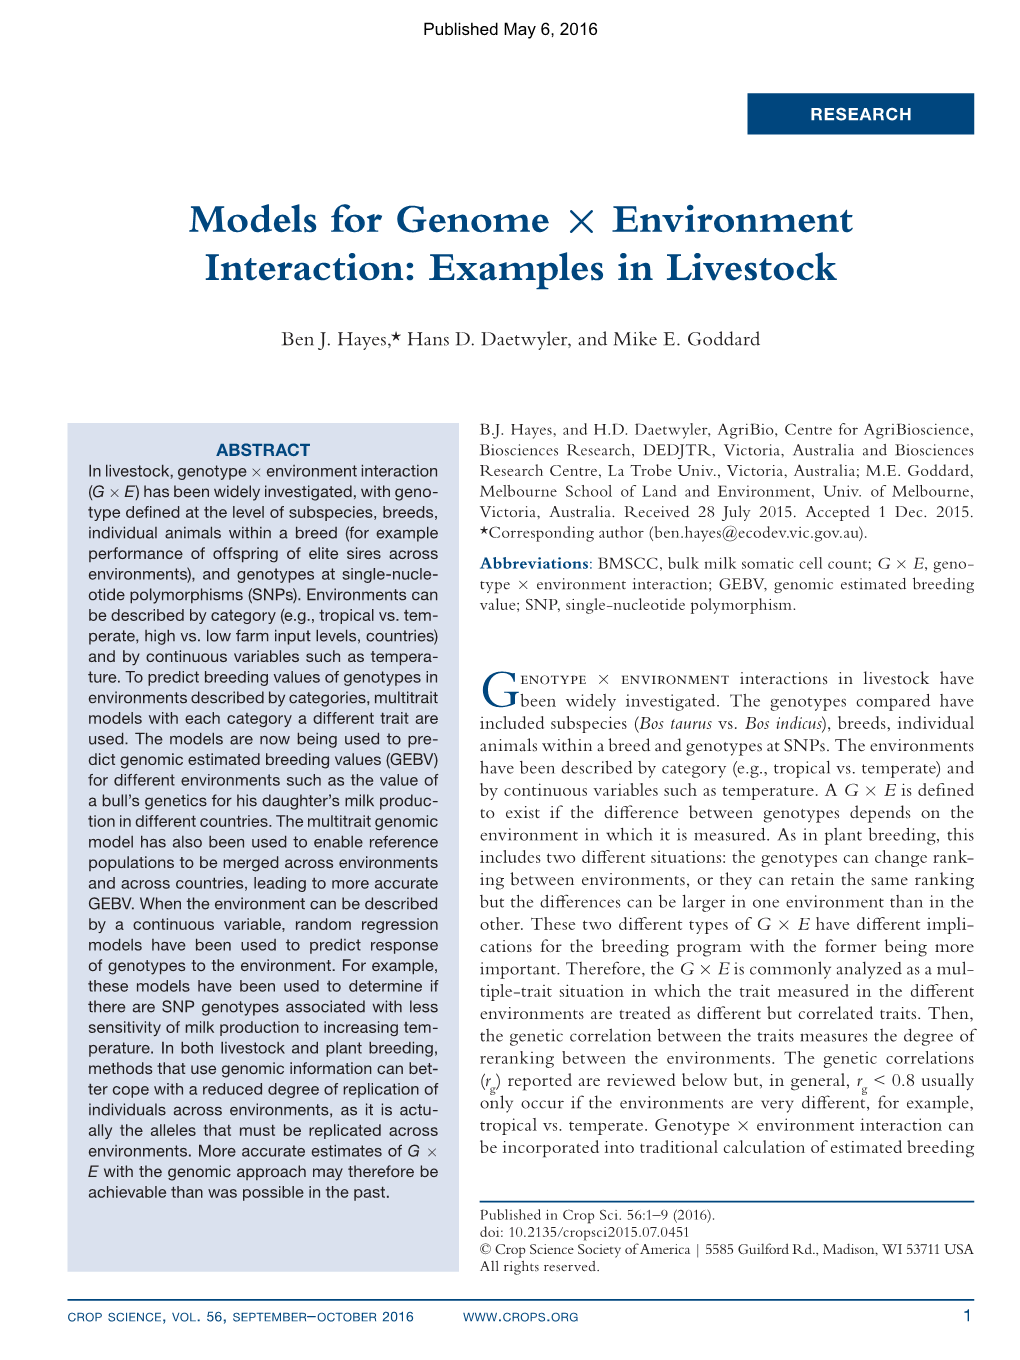 Models for Genome ´ Environment Interaction: Examples in Livestock